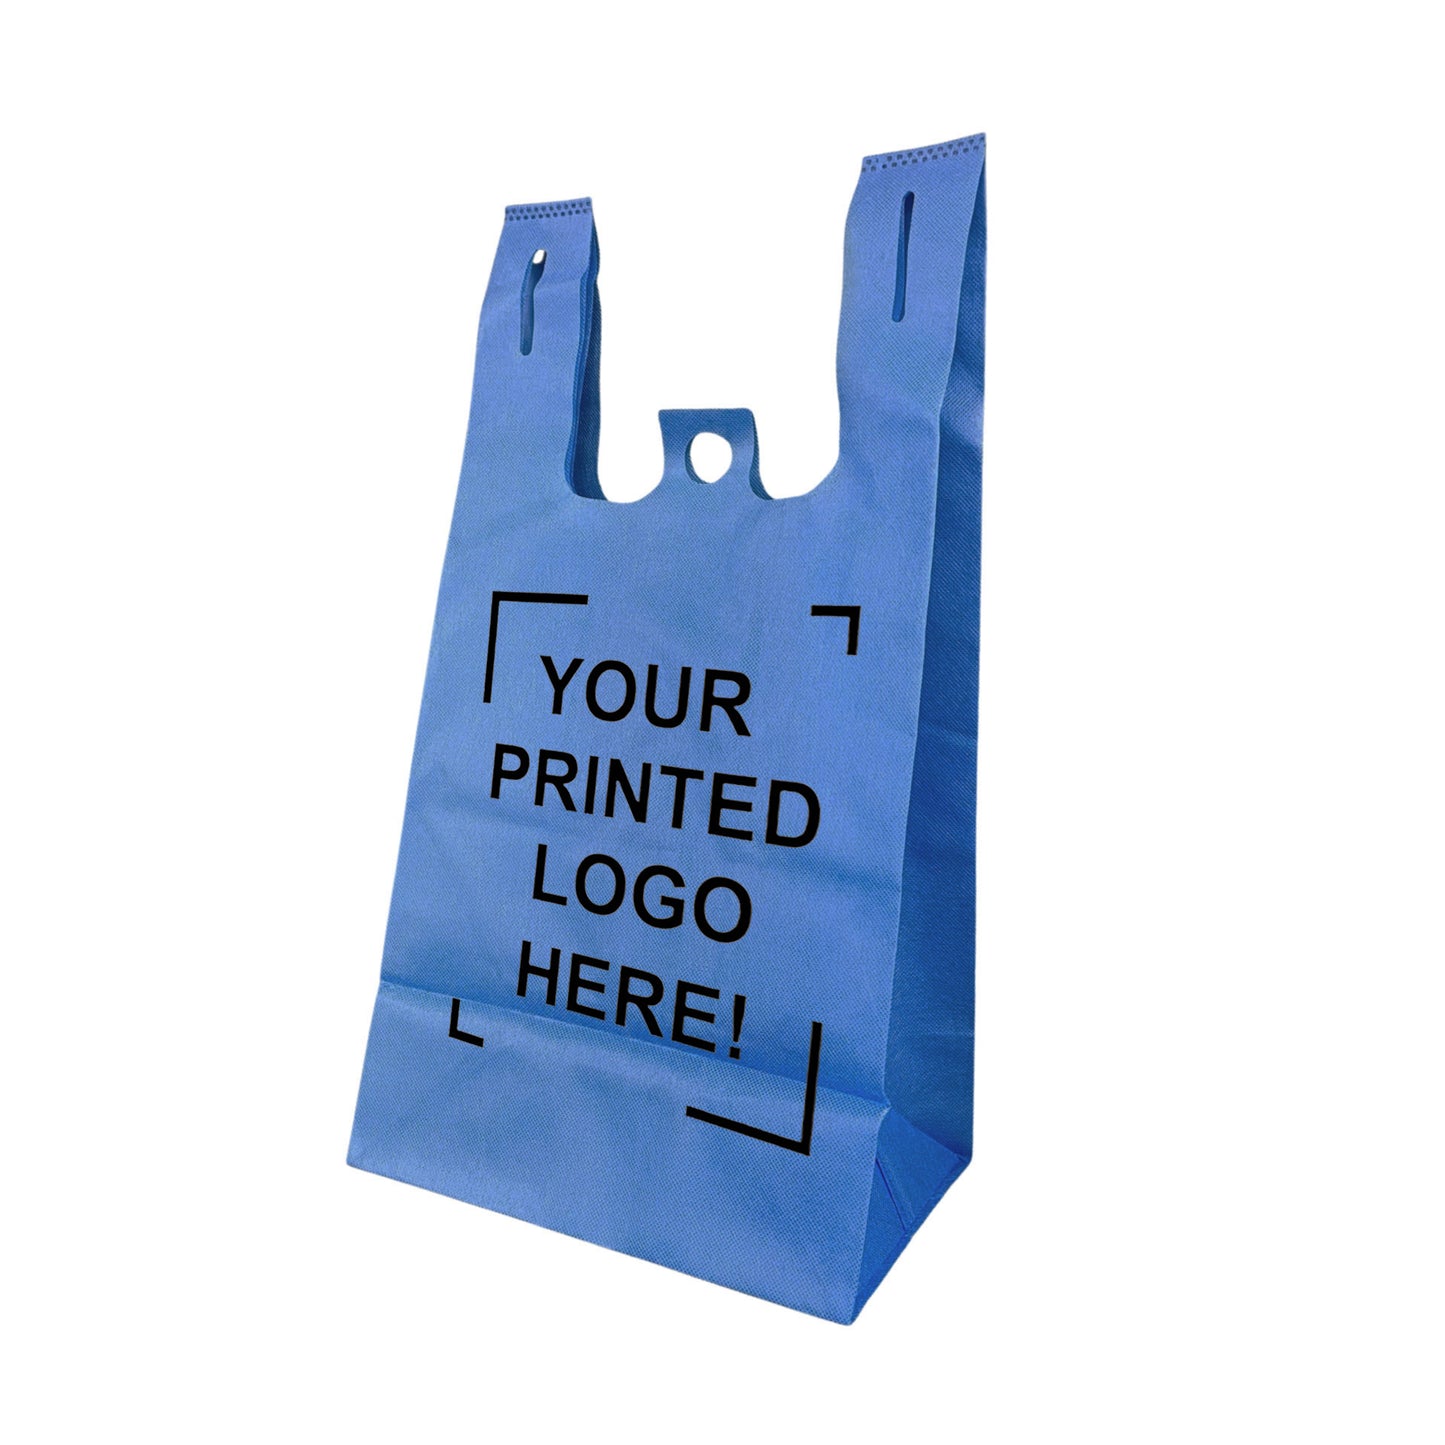 200pcs, Non-Woven Reusable T-Shirt Bag 11x7x20x7 inches Blue Shopping Bags Square Bottom, One Color Custom Print, Printed in Canada